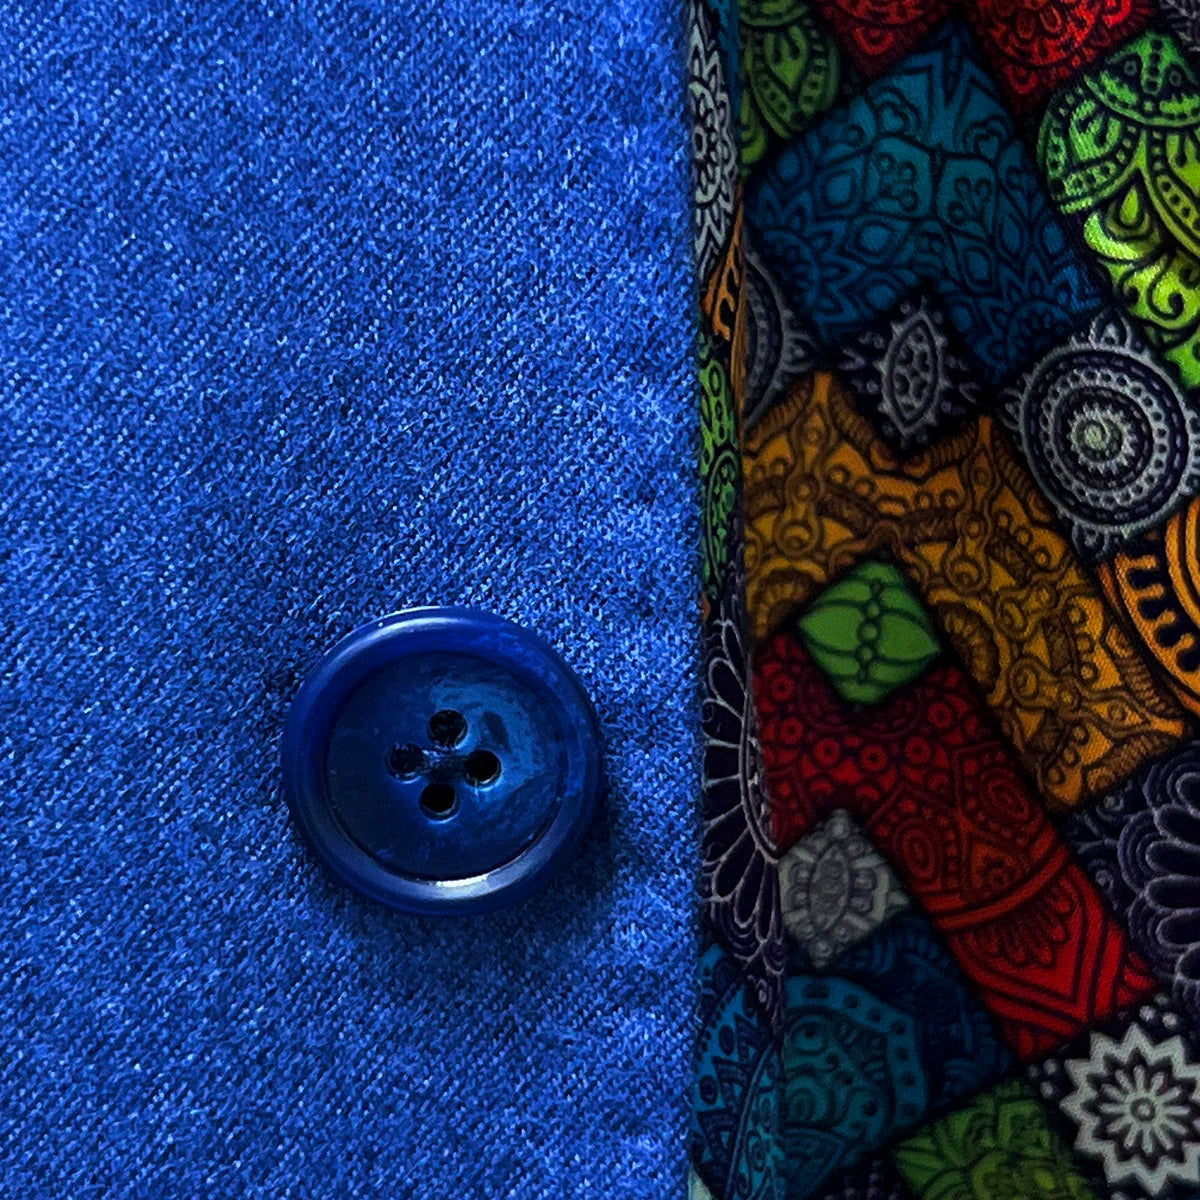 Horn marble buttons on a light blue flannel fall winter suit.